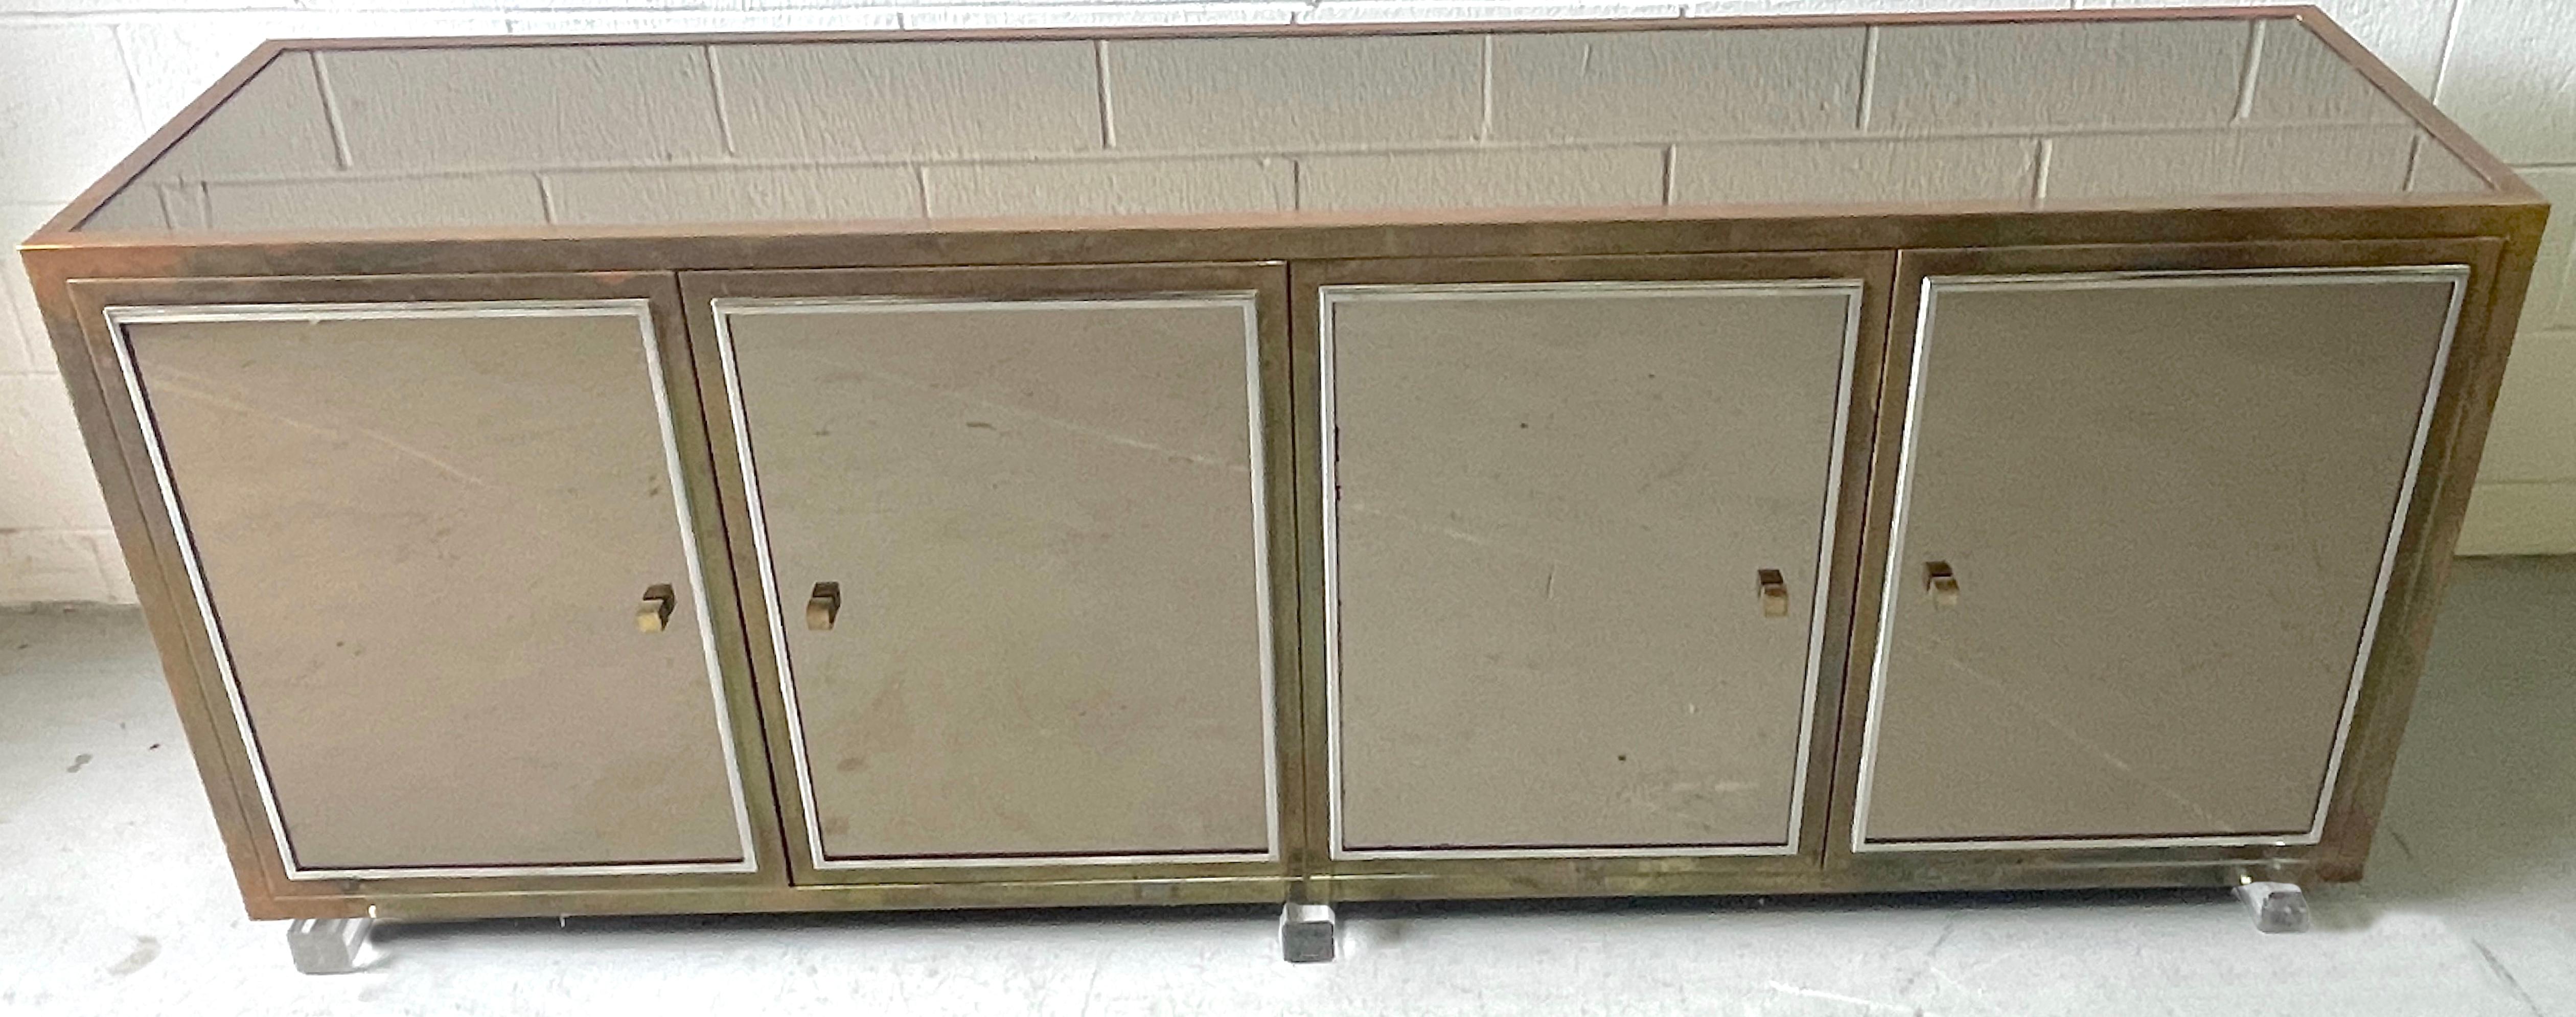 Large French Modern Mirrored Credenza/Sideboard  by Michel Pigneres  In Good Condition For Sale In West Palm Beach, FL